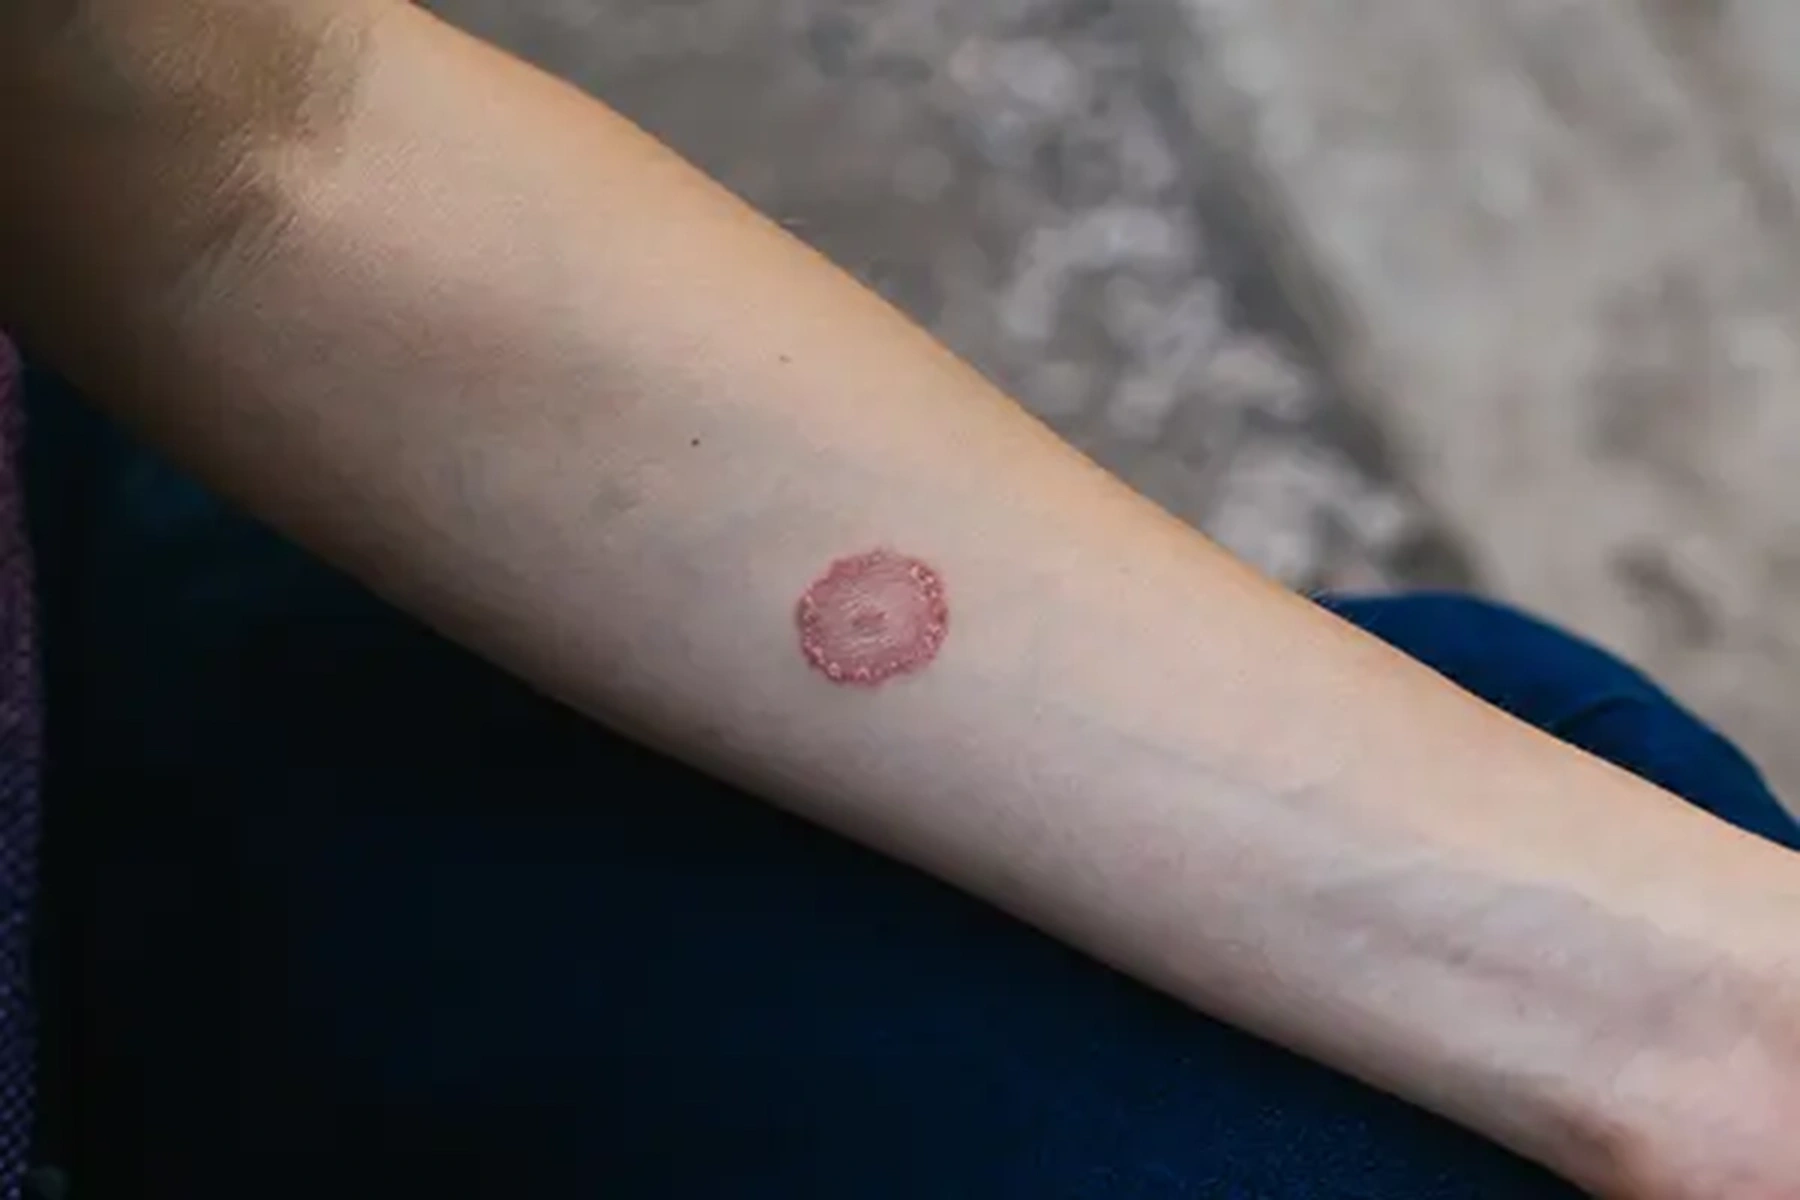 Personal Adornment: Can People With Dermatographia Get Tattoos? – Skintome